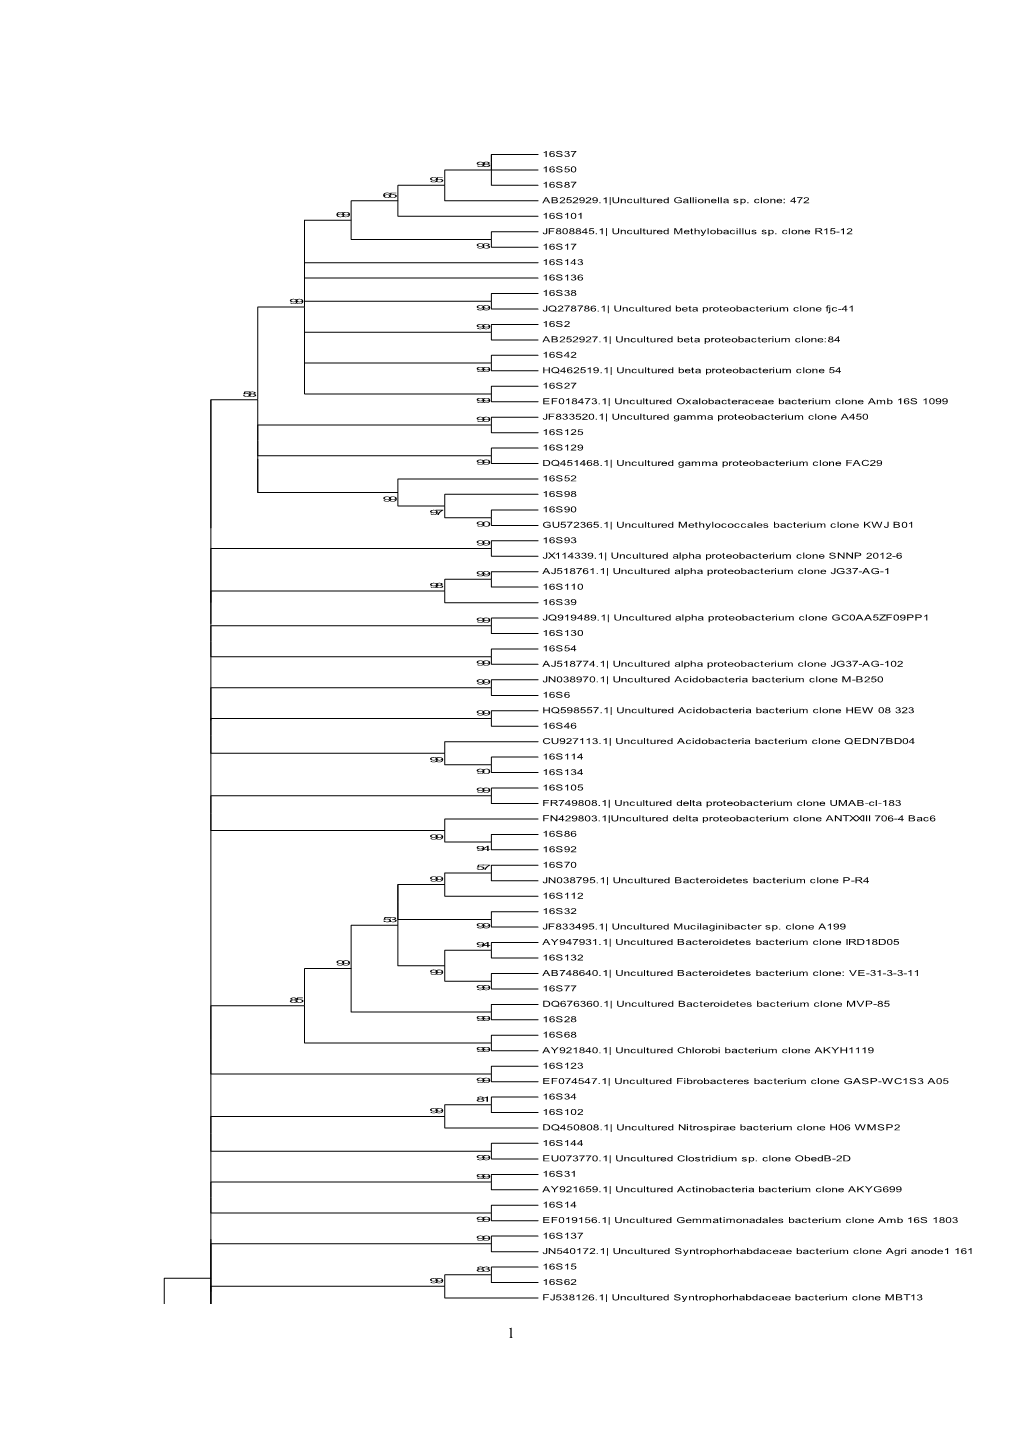 Figure 2. Neighbor-Joining Tree Based on 16S Rrna Gene Sequences Showing the Phylogenetic